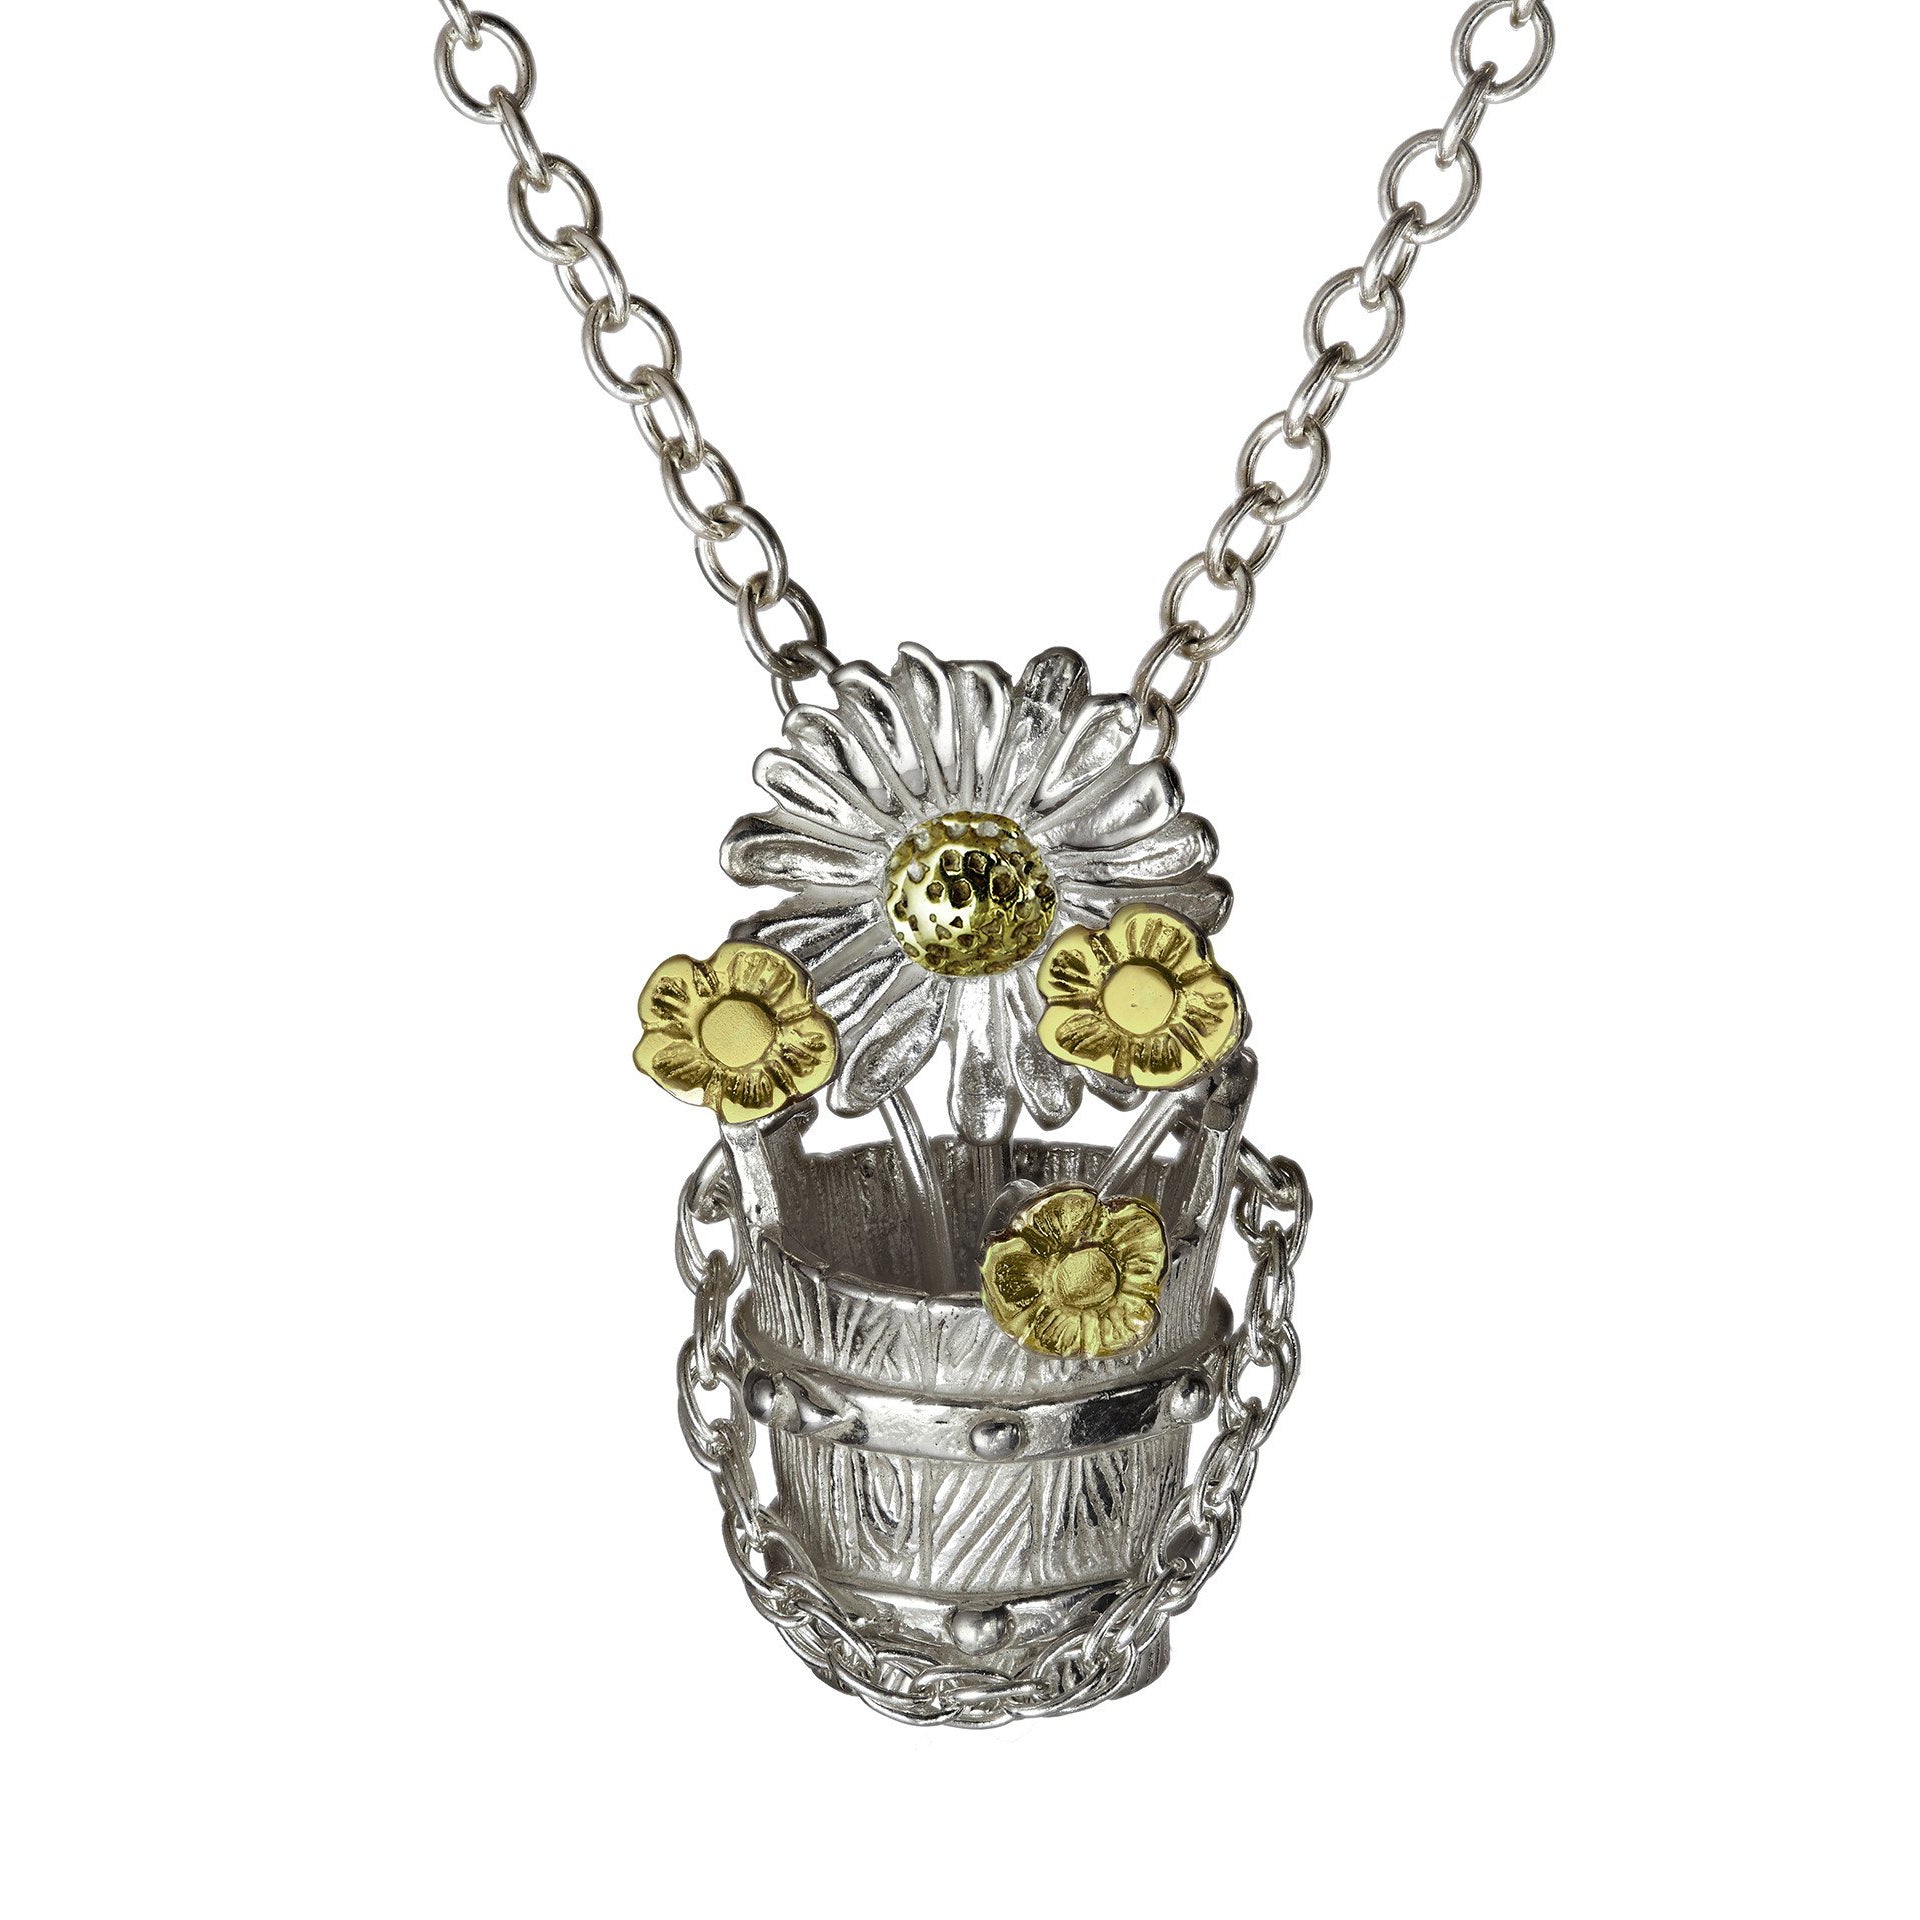 Bucket full of flowers silver and gold pendant, a daisy jewellery piece made in Ireland.